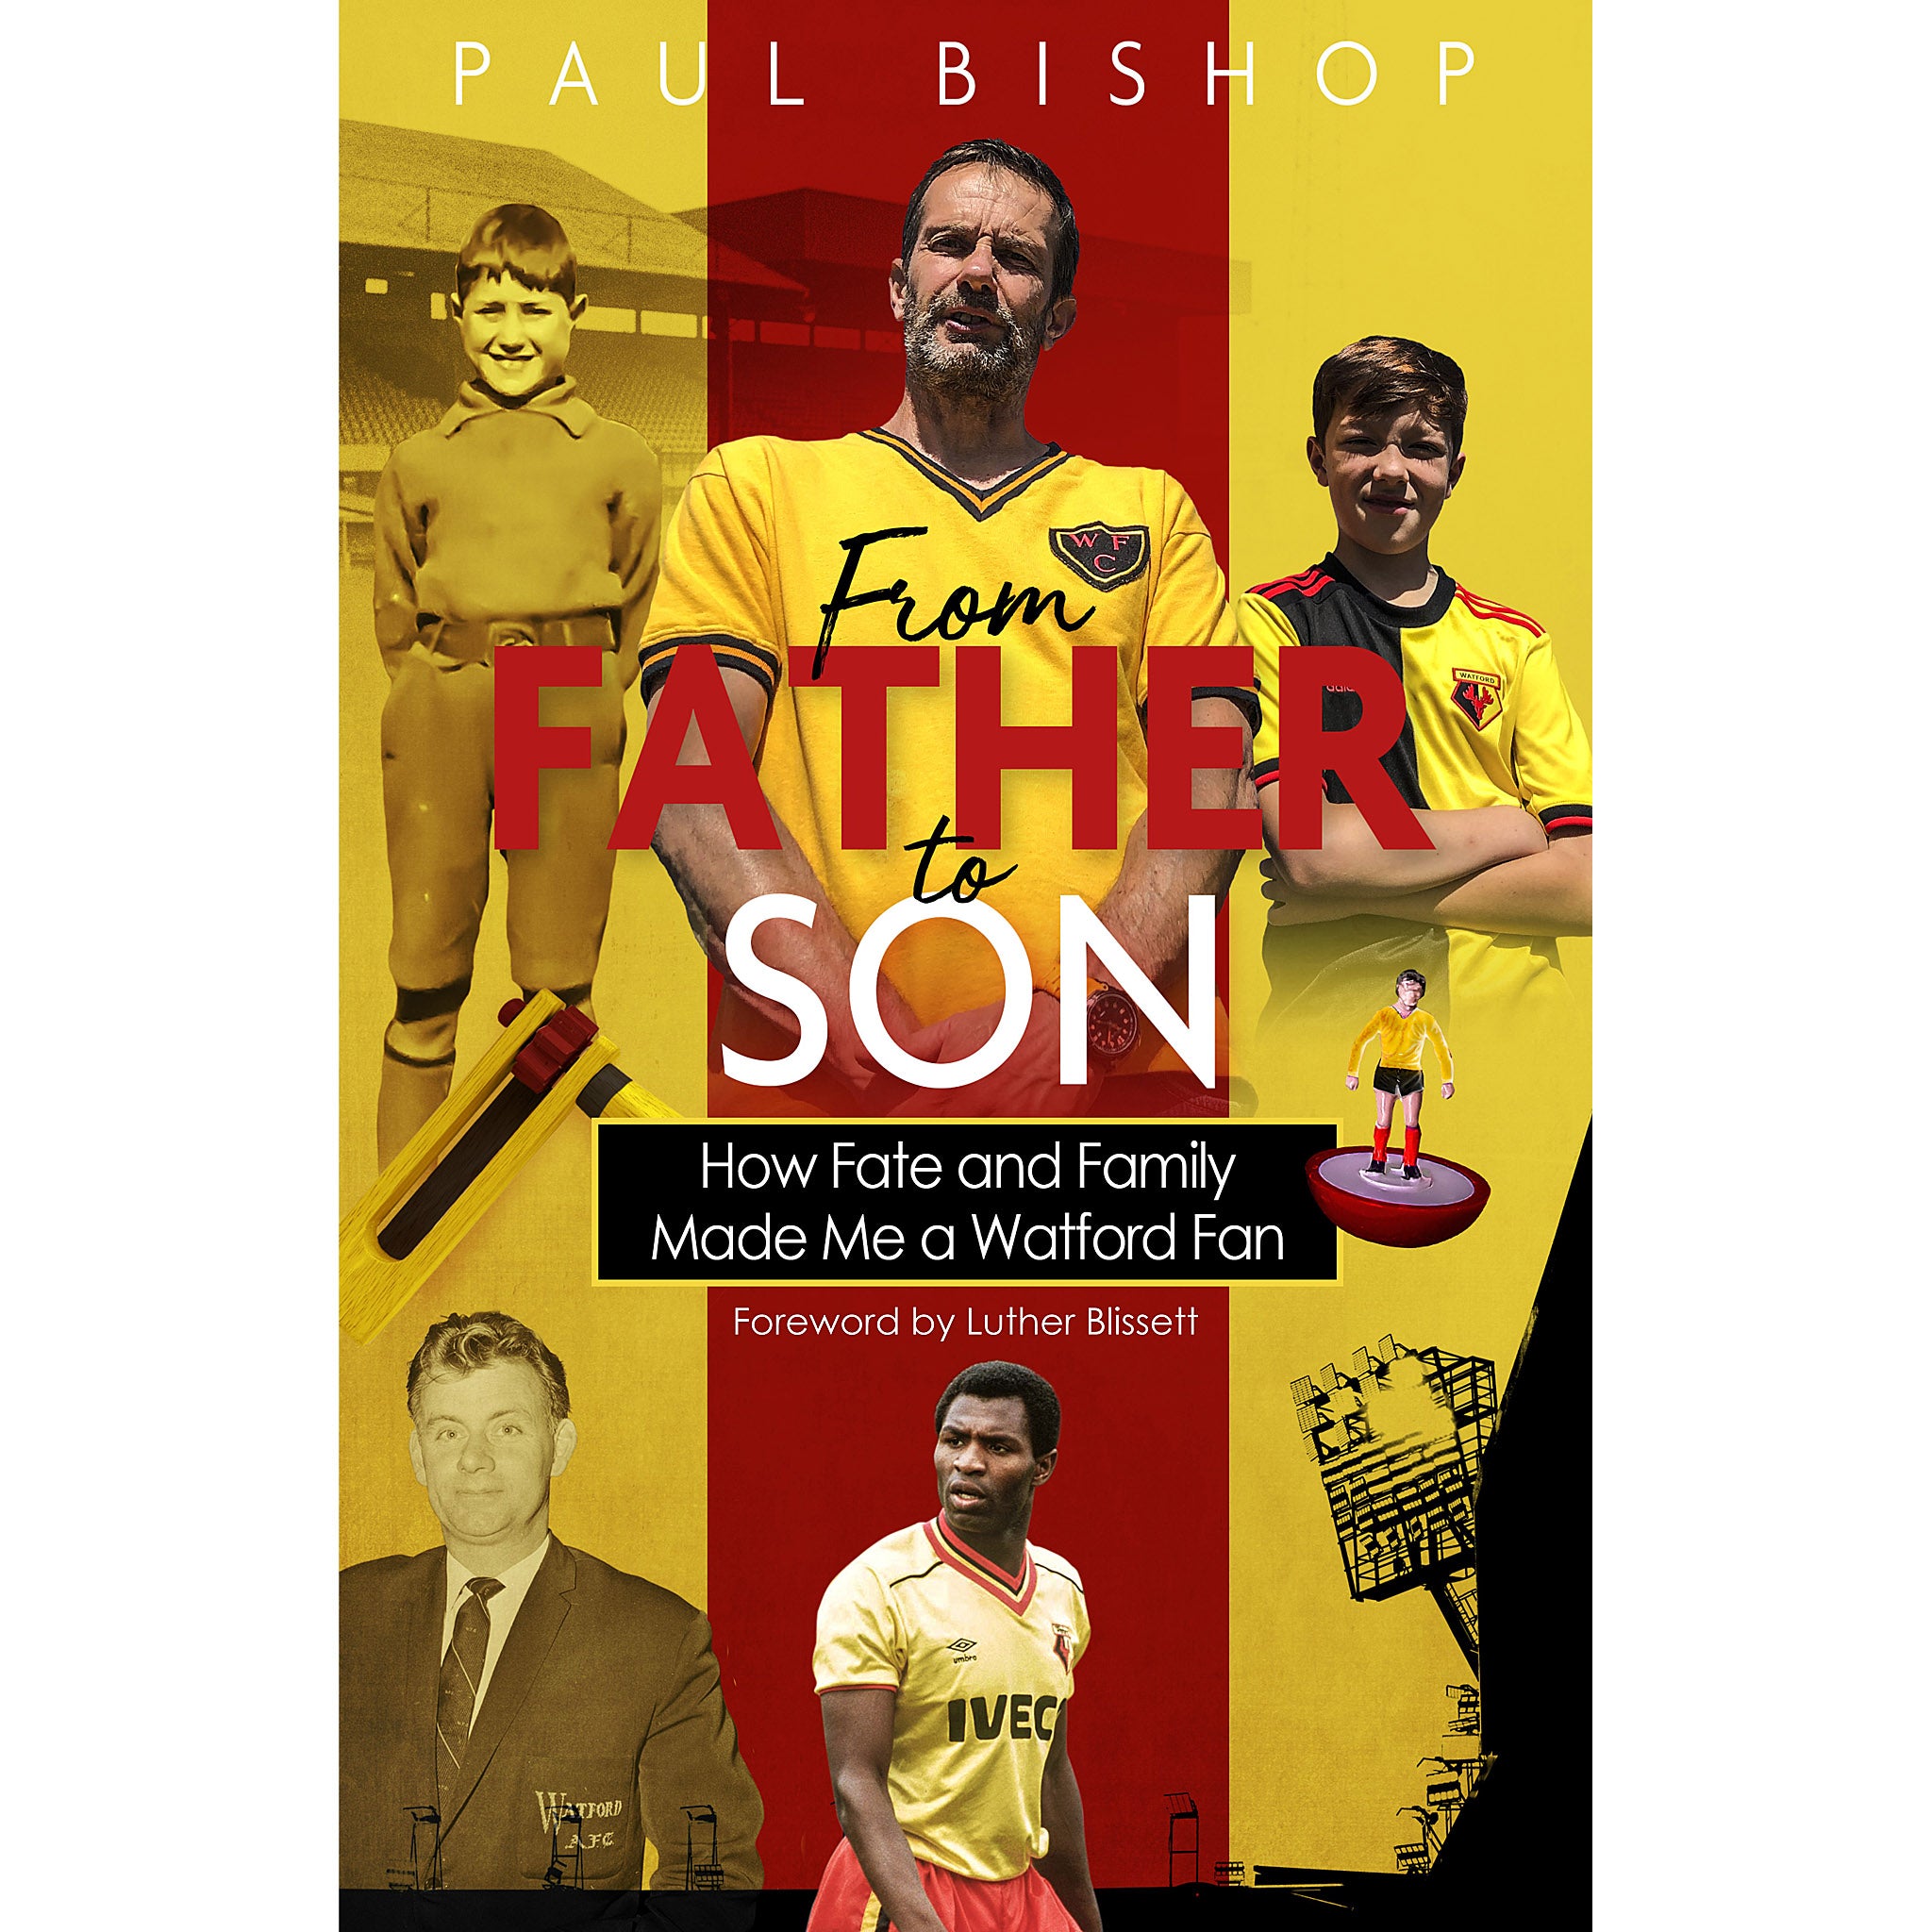 From Father to Son – How Fate and Family Made Me a Watford Fan